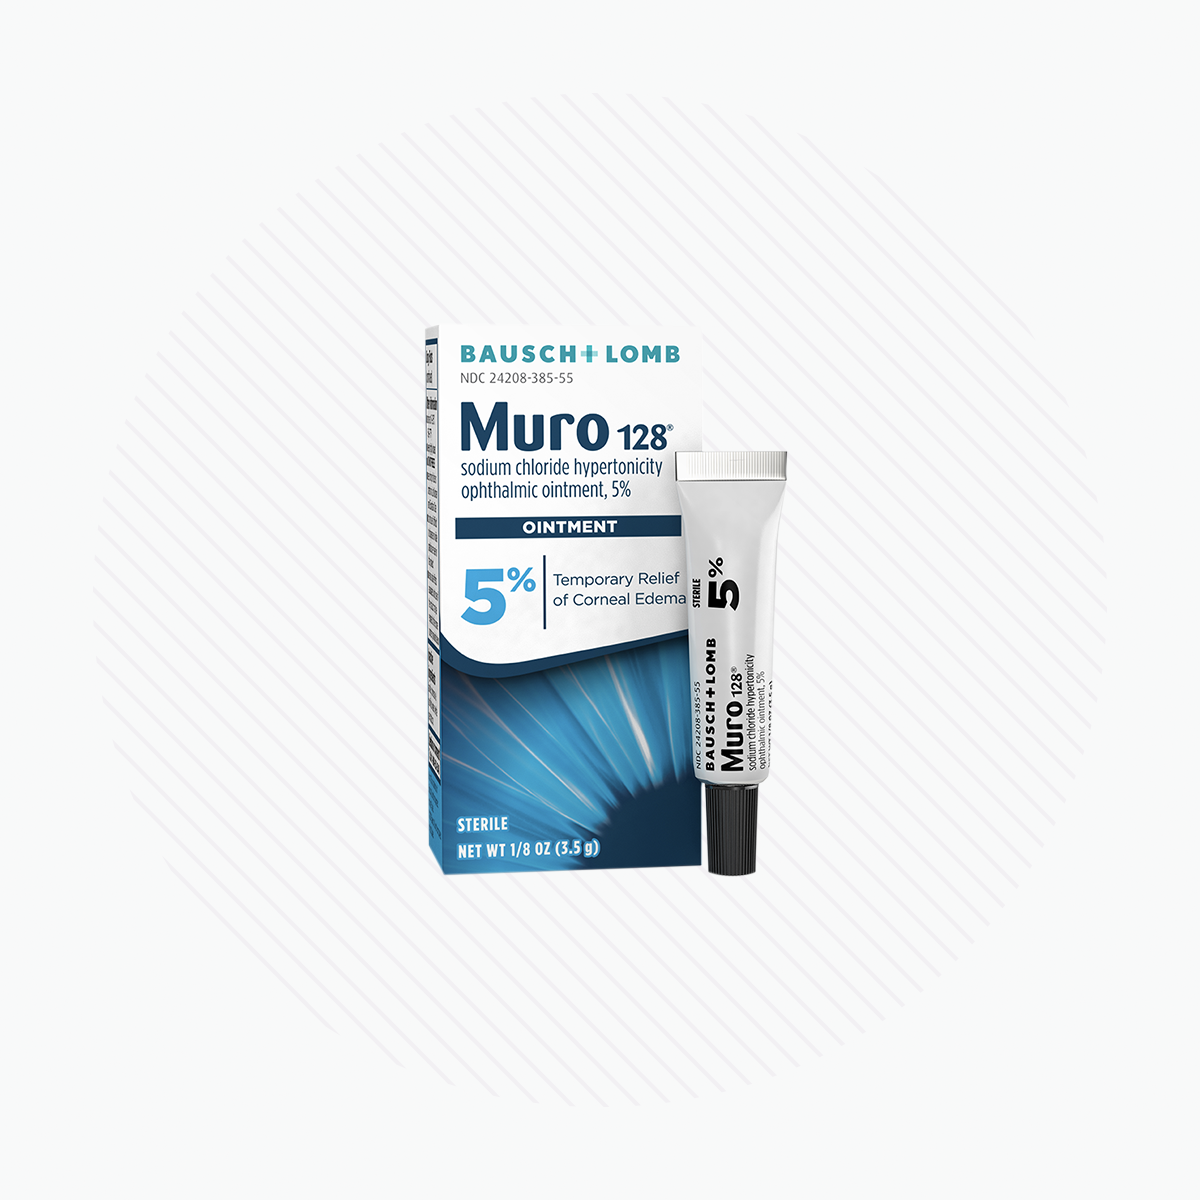 Muro 128 Sodium Chloride Ointment, Temporary Relief for Corneal Edema, 5% Ointment, 1/8 Fl Oz (3.5 g)